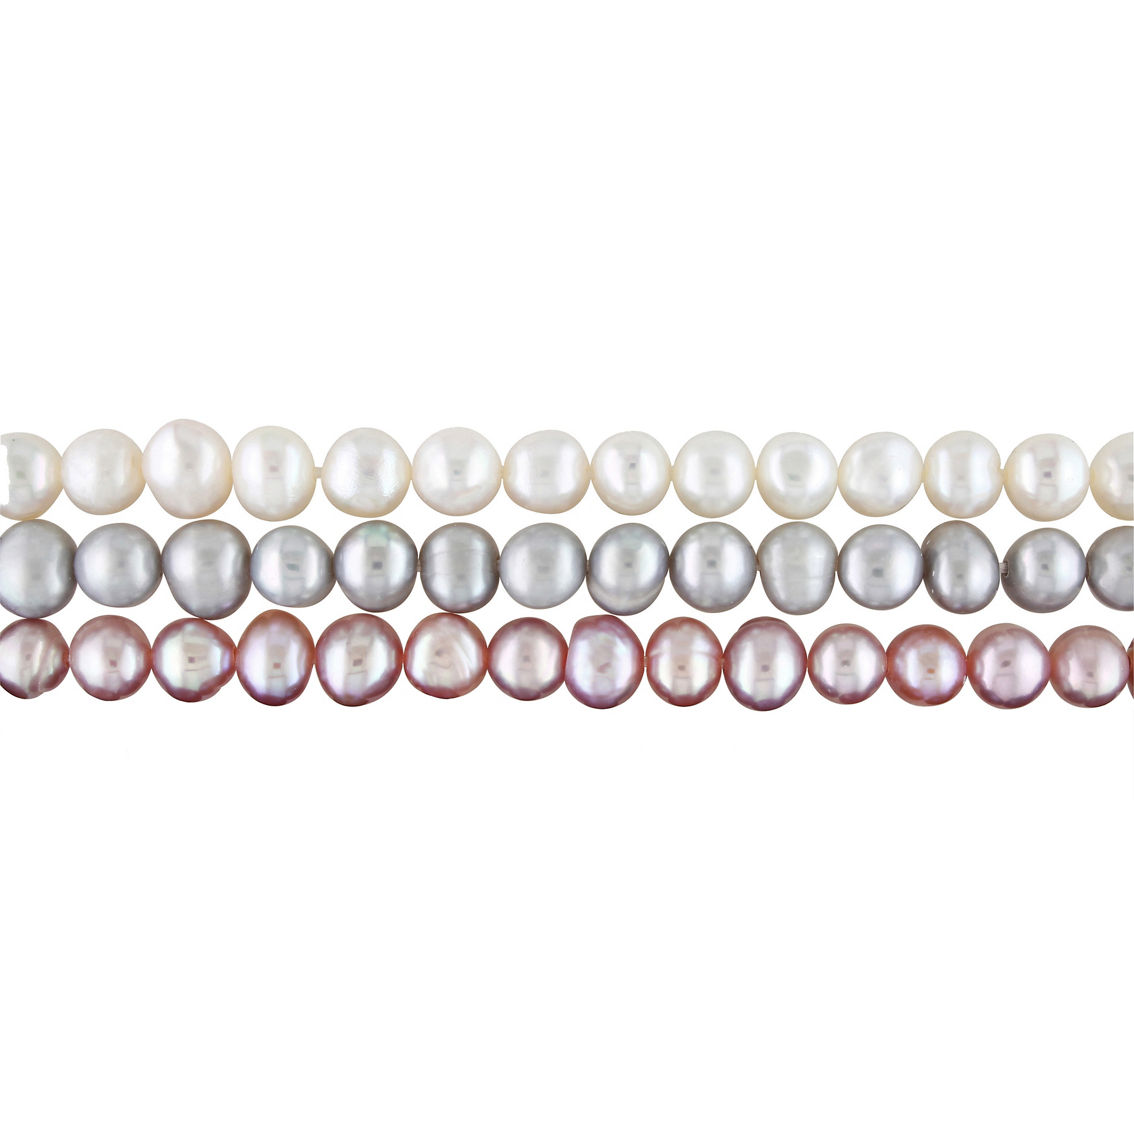 Sofia B. Cultured Freshwater Pearl 3 pc. Bracelet Set with Ribbon - Image 2 of 5